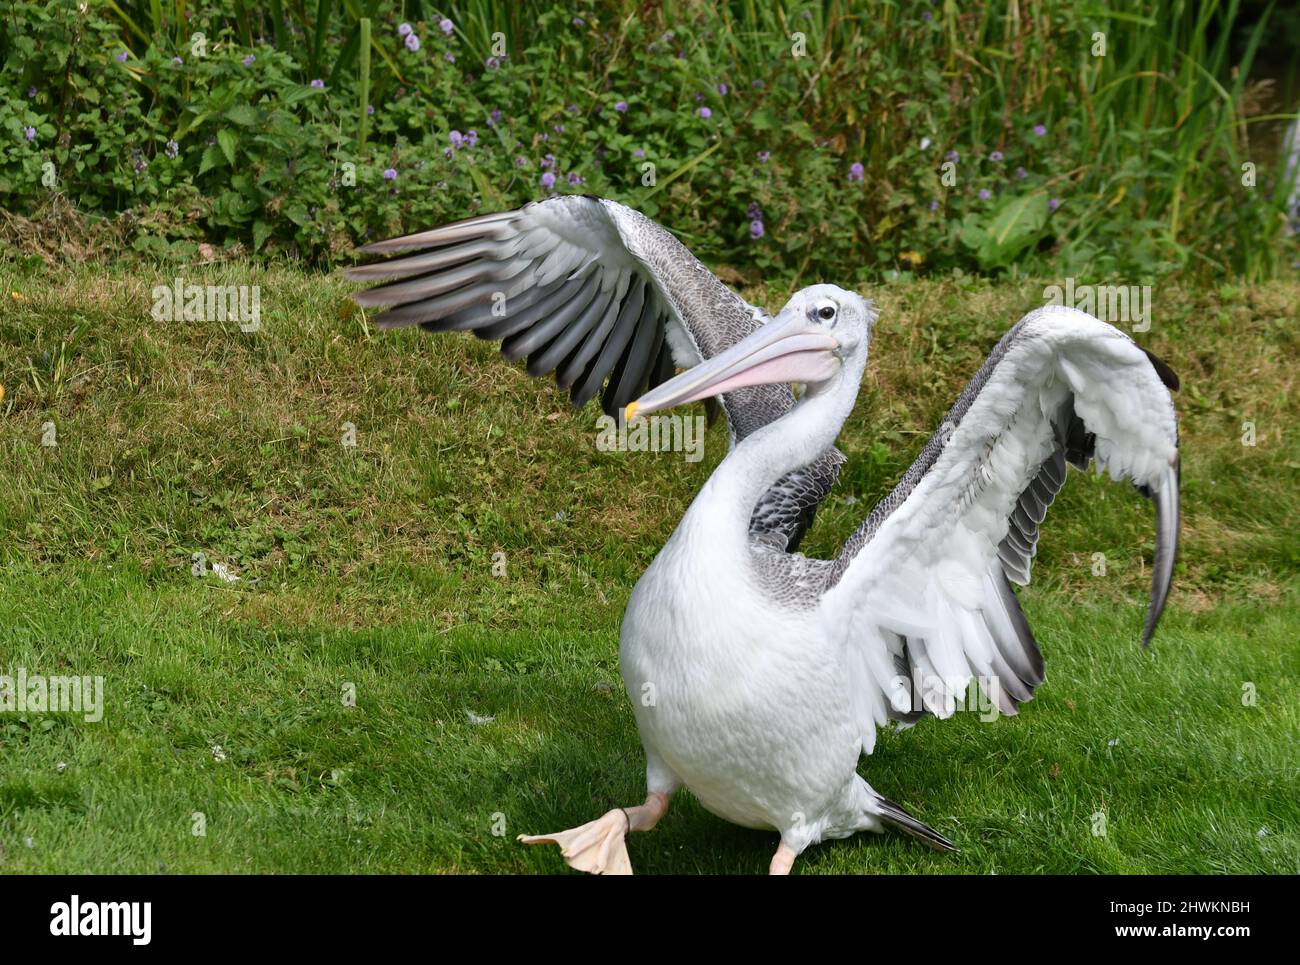 Pelican at Birdland Park & Gardens in Bourton-on-the-Water, Gloucestershire, UK Stock Photo